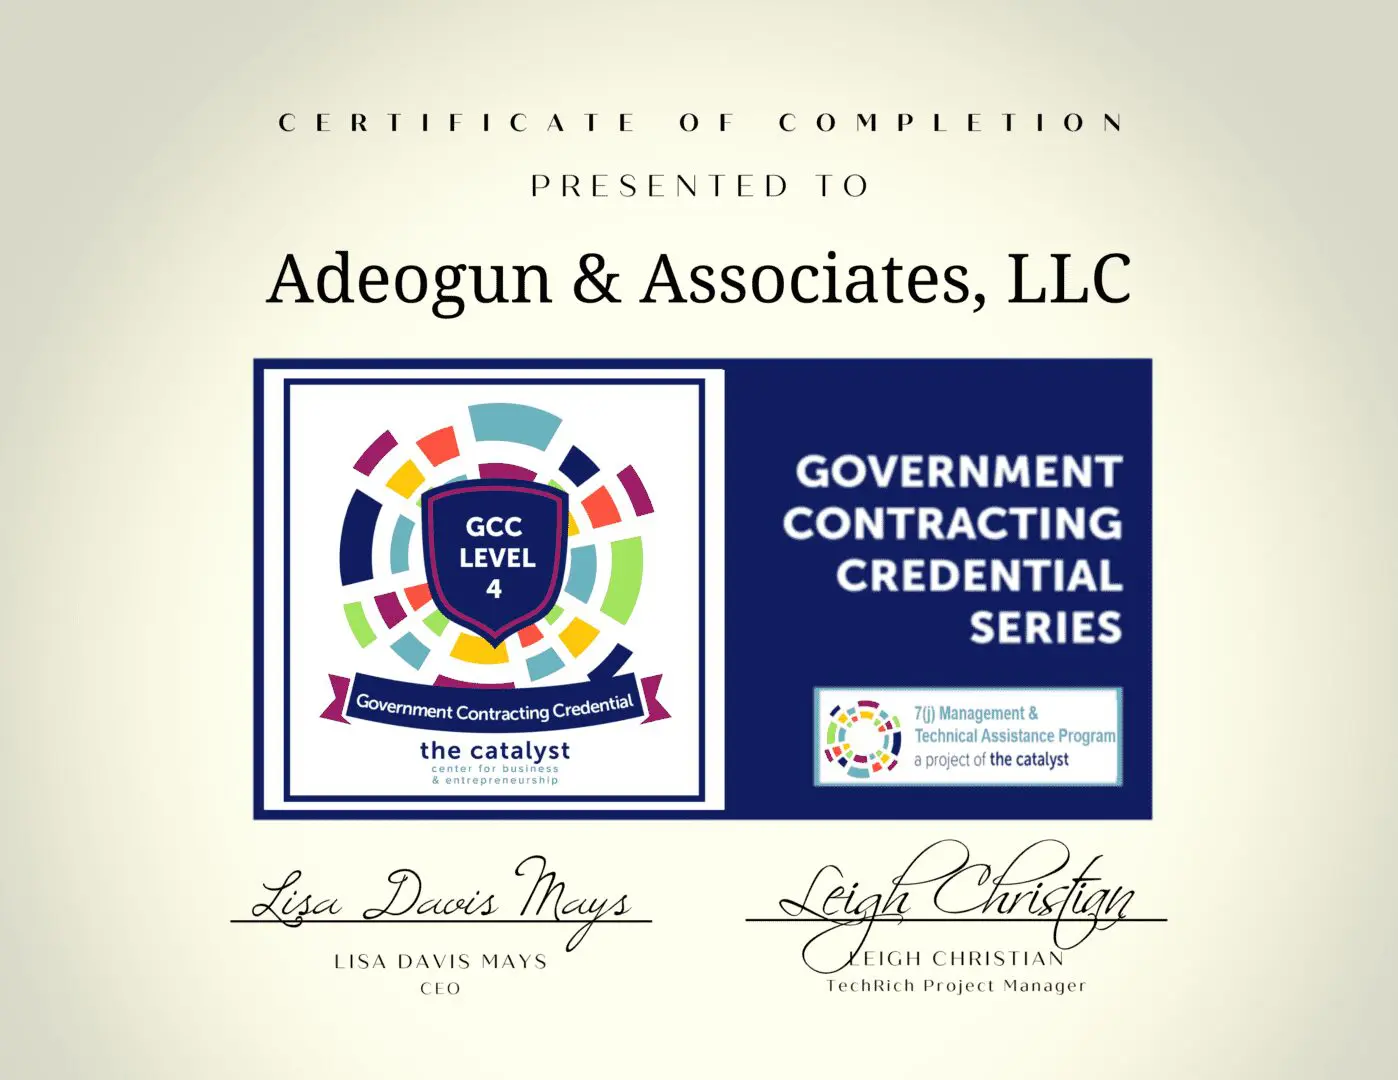 A certificate of completion for government contracting credential series.